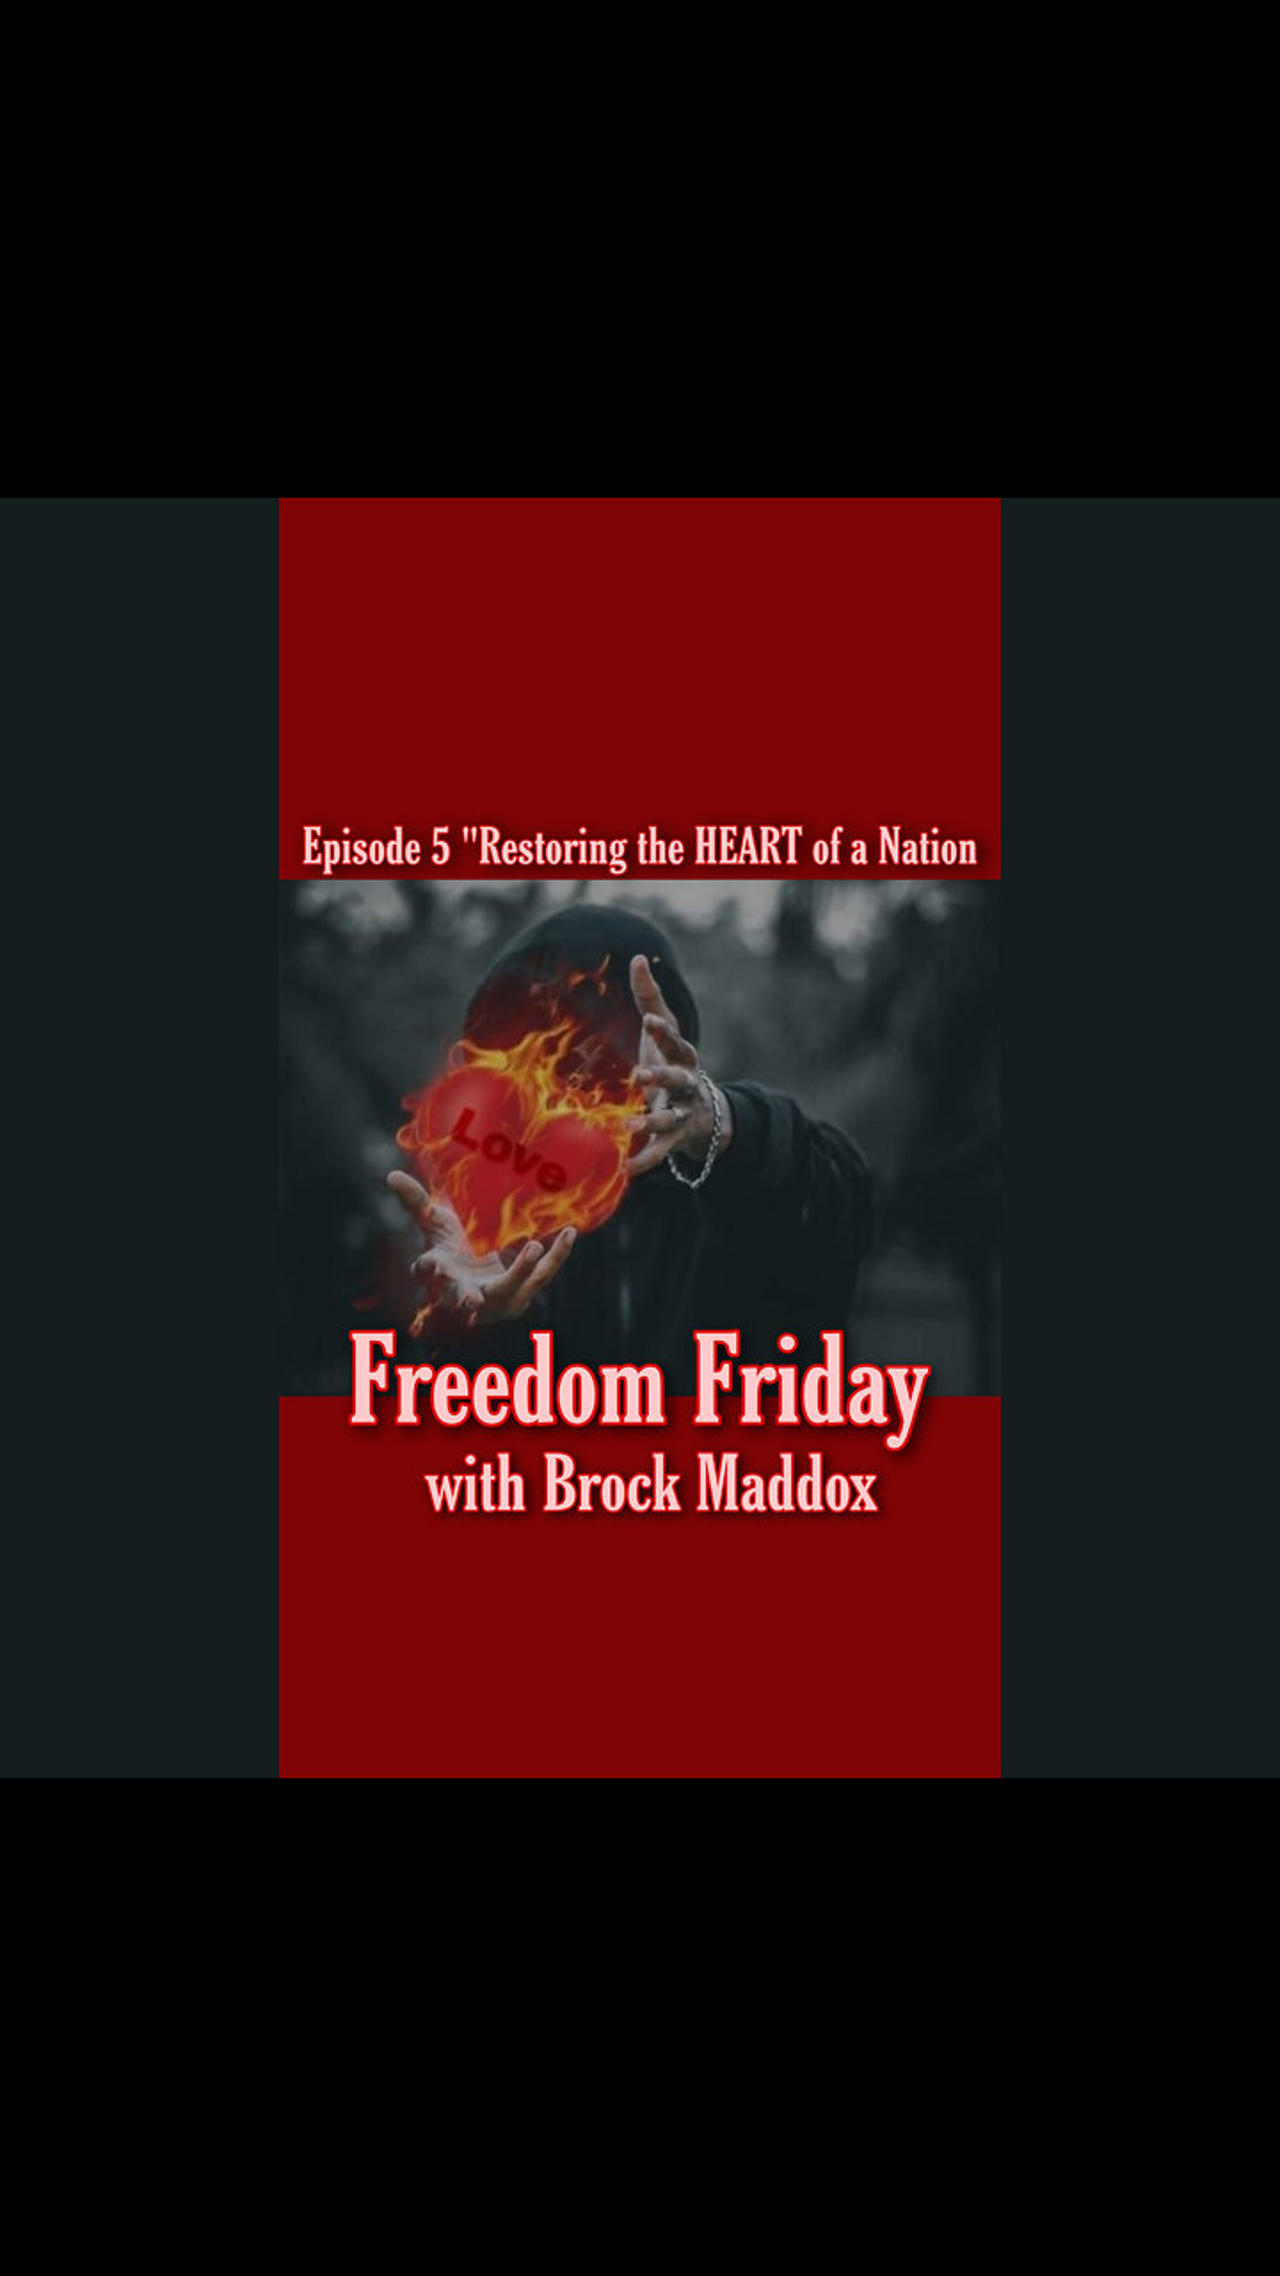 Freedom Friday LIVE at FIVE with Brock Maddox - Episode 5 "Restoring the HEART of a Nation"